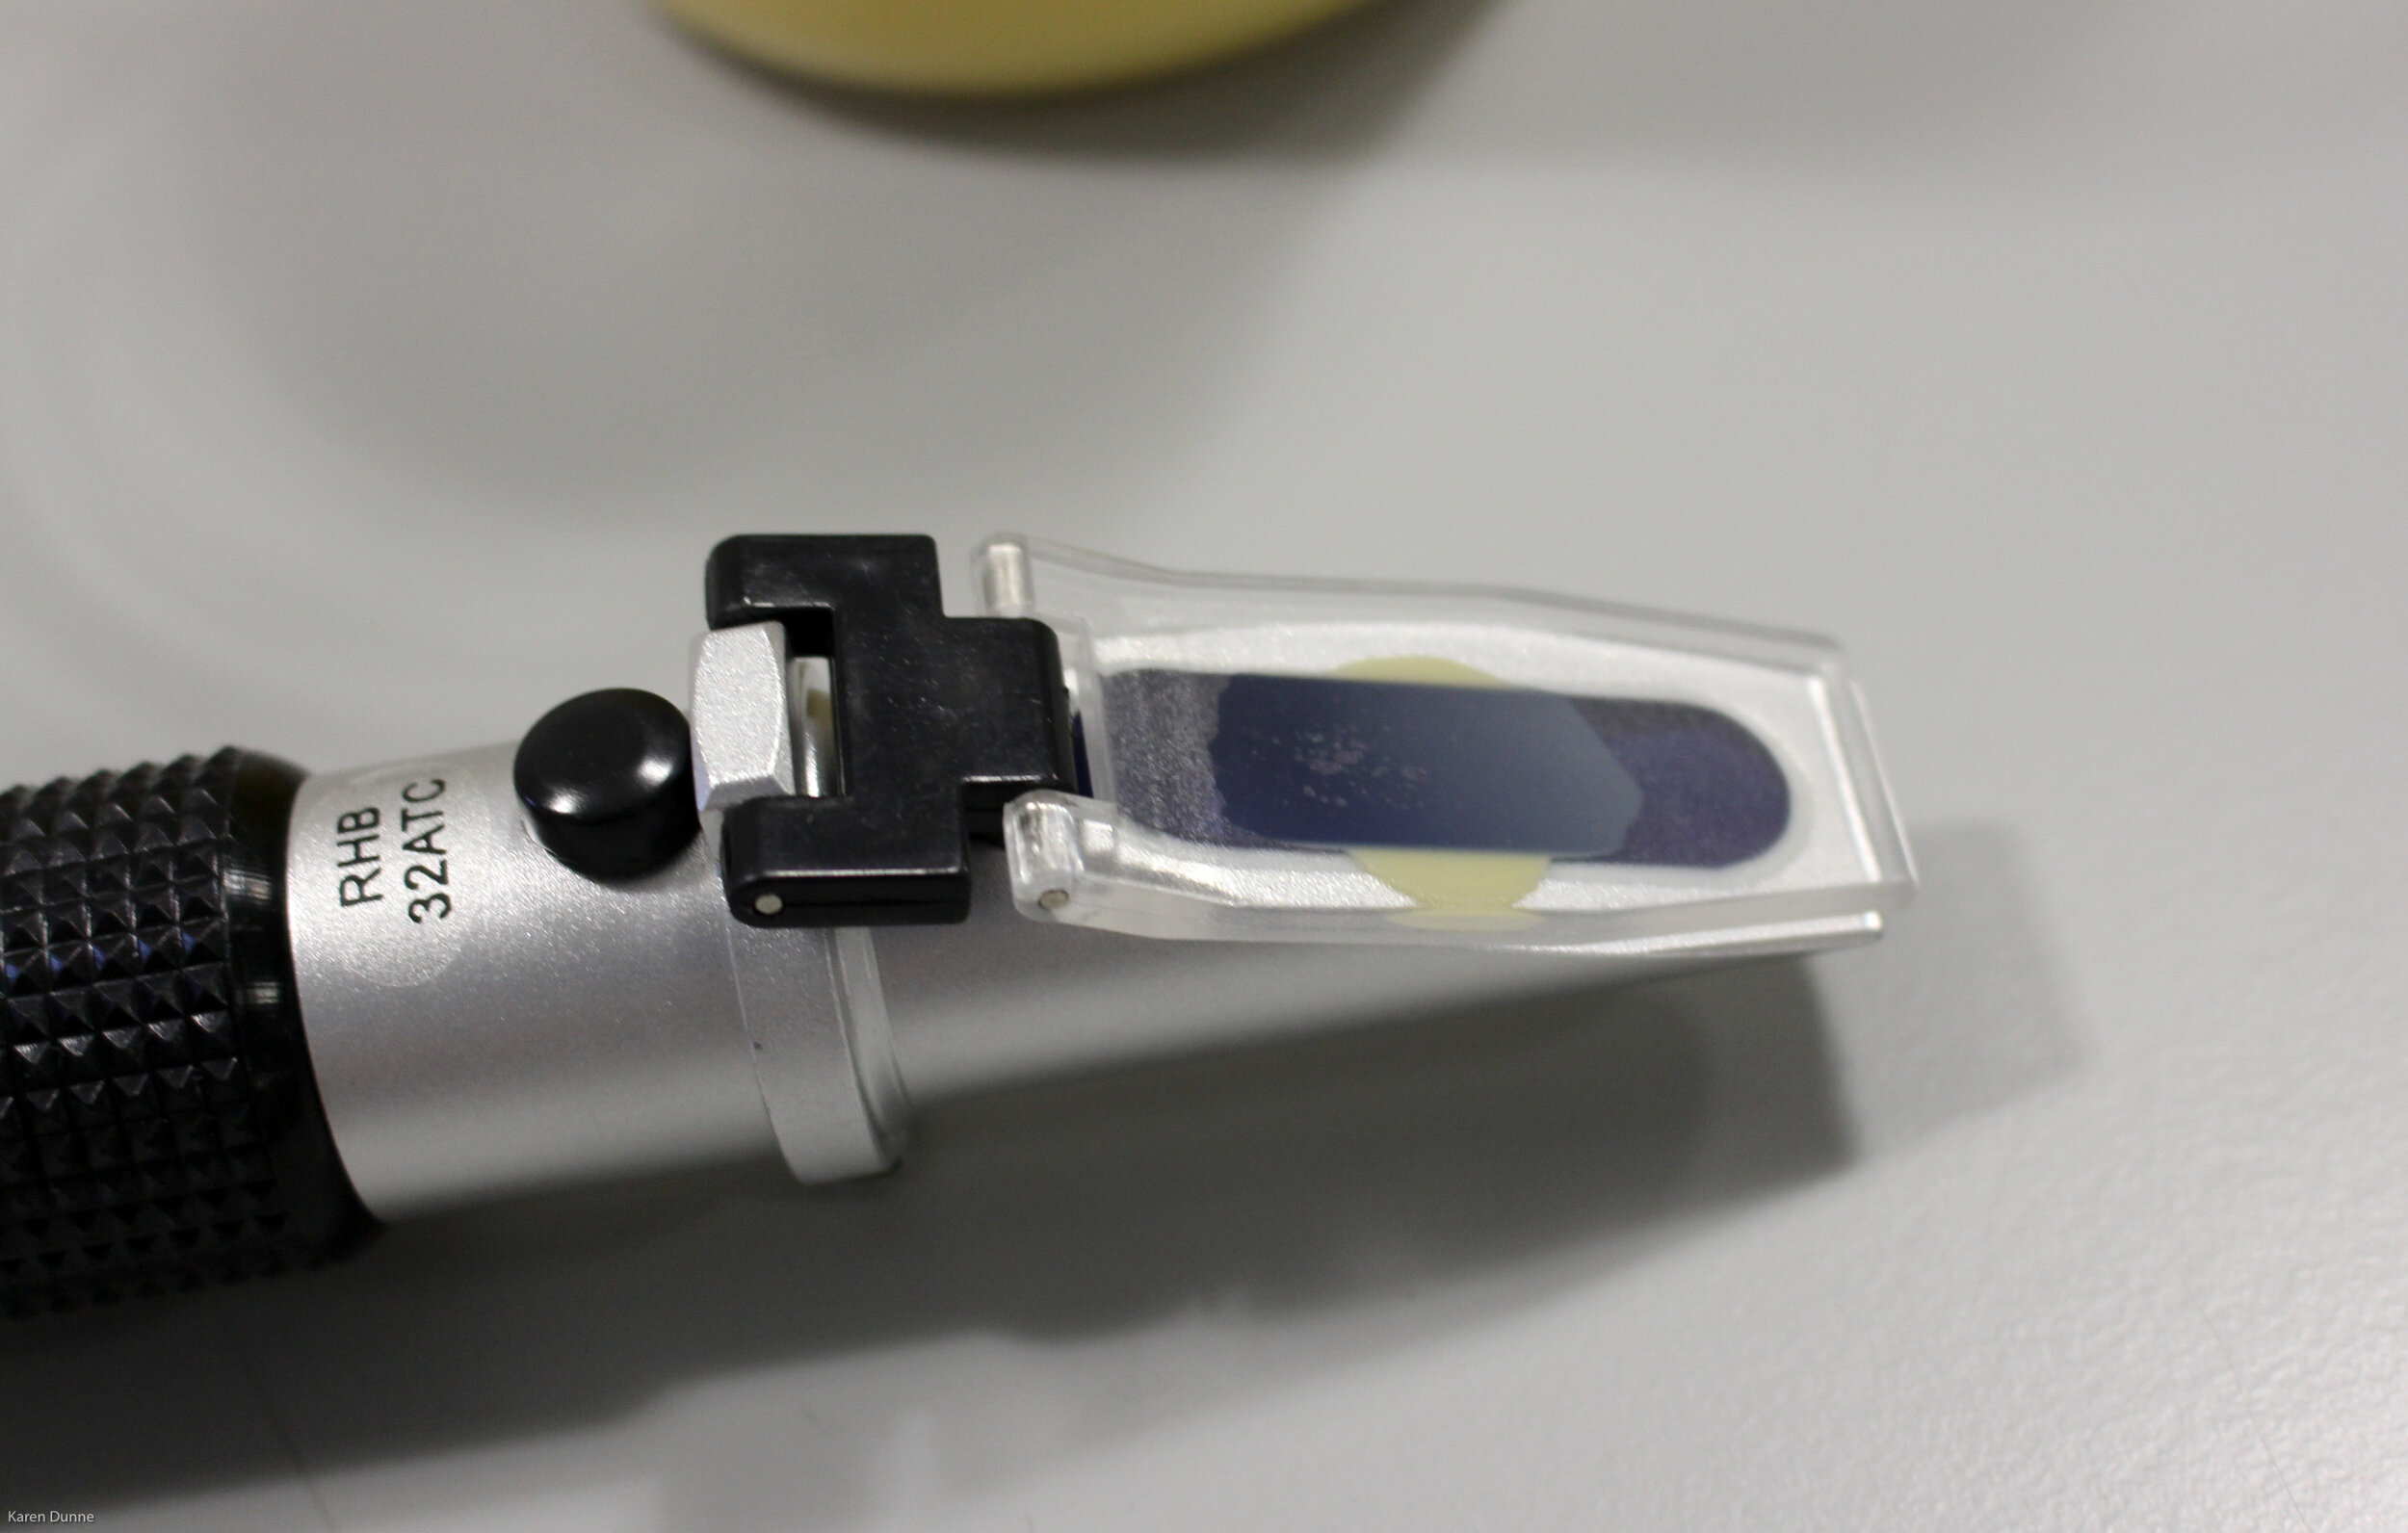  Hold the refractometer up to the light and look through it to view the scale 